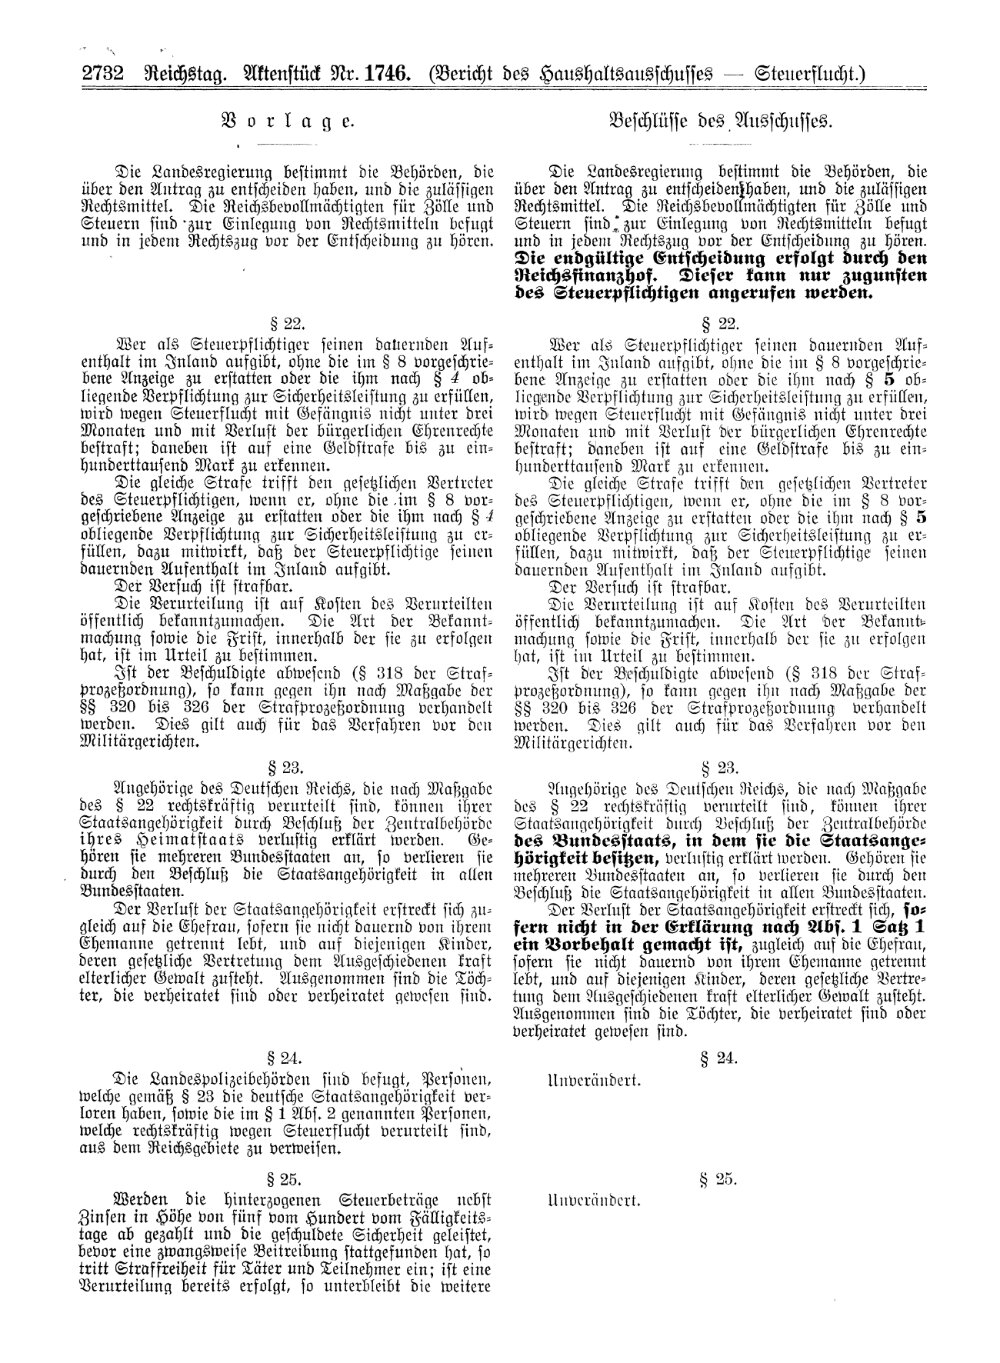 Scan of page 2732